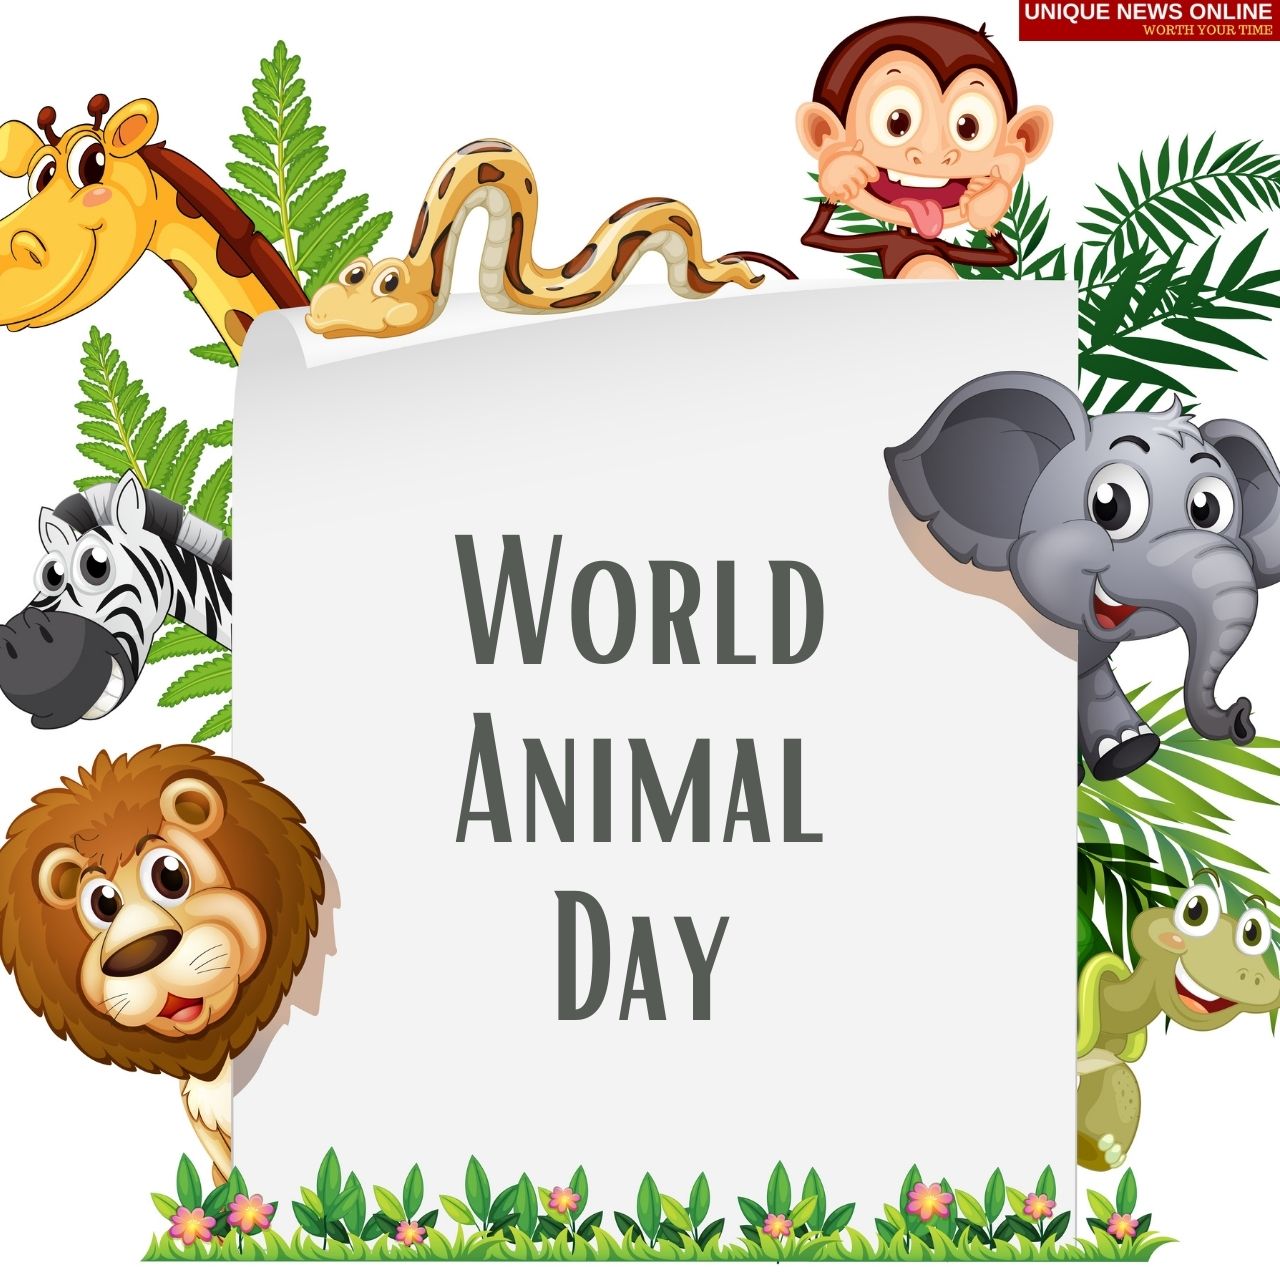 World Animal Day 2021 Quotes, Wishes, Poster, HD Images, and Messages to Create awareness